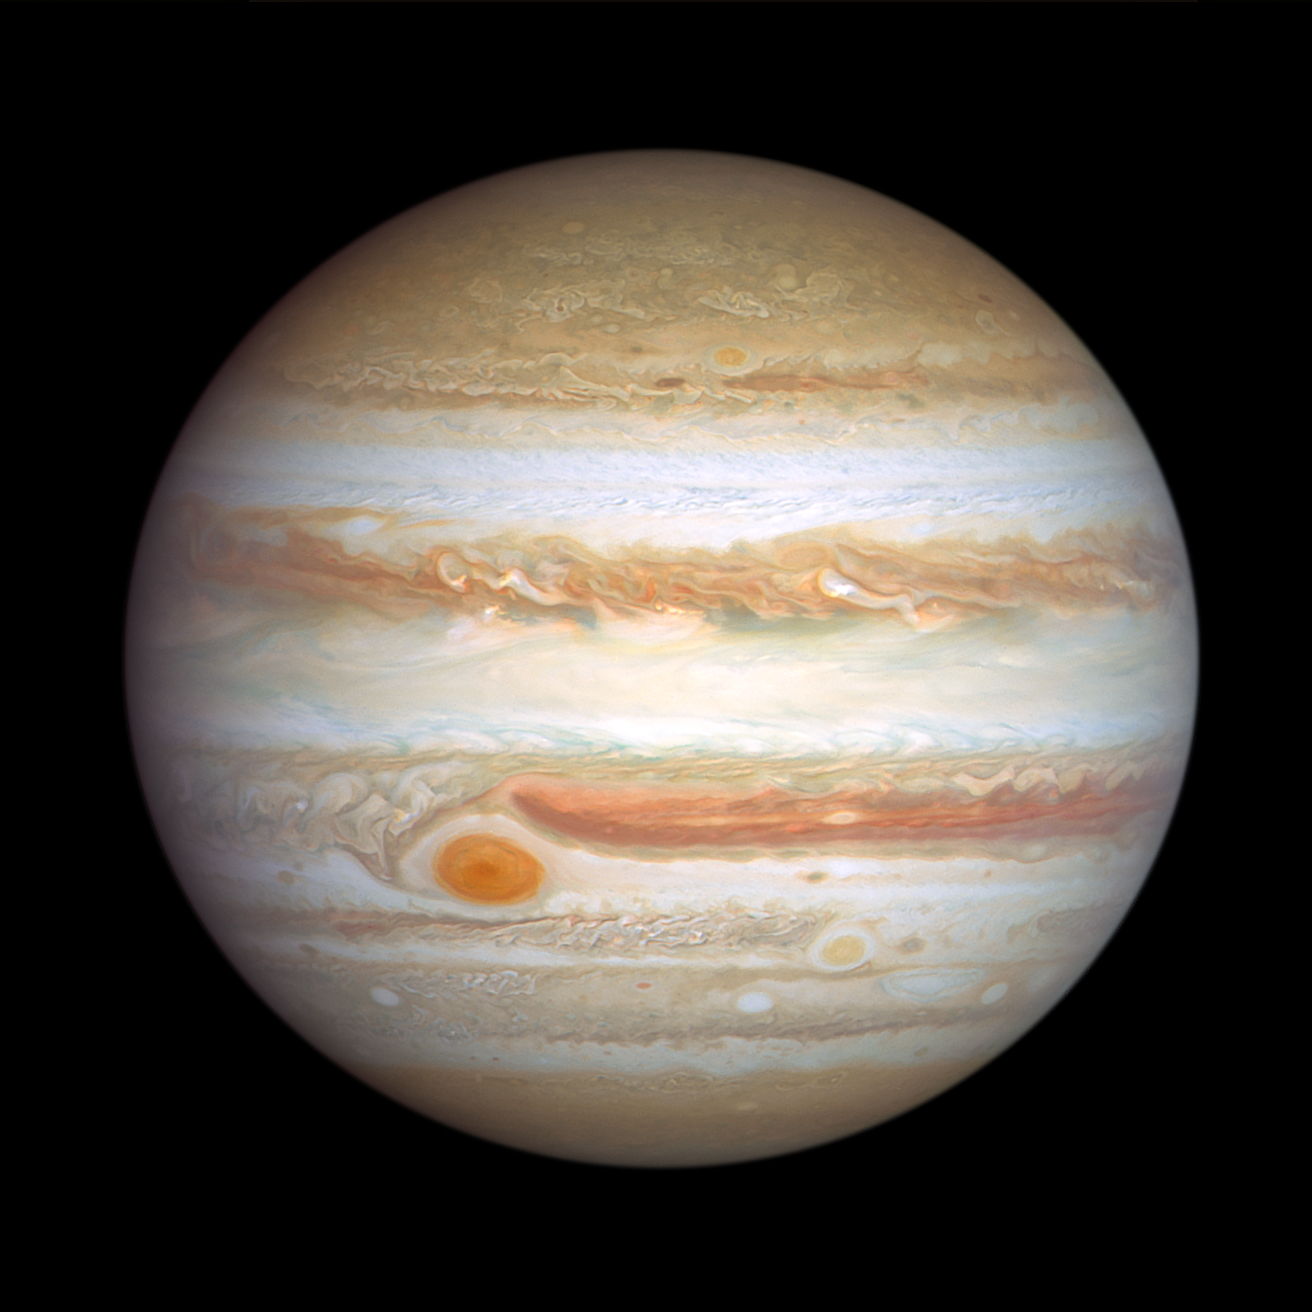 Hubble Space Telescope image of Jupiter taken on January 5, 2024. Jupiter is banded in stripes of brownish orange, light gray, soft yellow, and shades of cream, punctuated with many large storms and small white clouds. The largest storm, the Great Red Spot, is the most prominent feature in the left bottom third of this view. To its lower right is a smaller reddish anticyclone, Red Spot Jr.